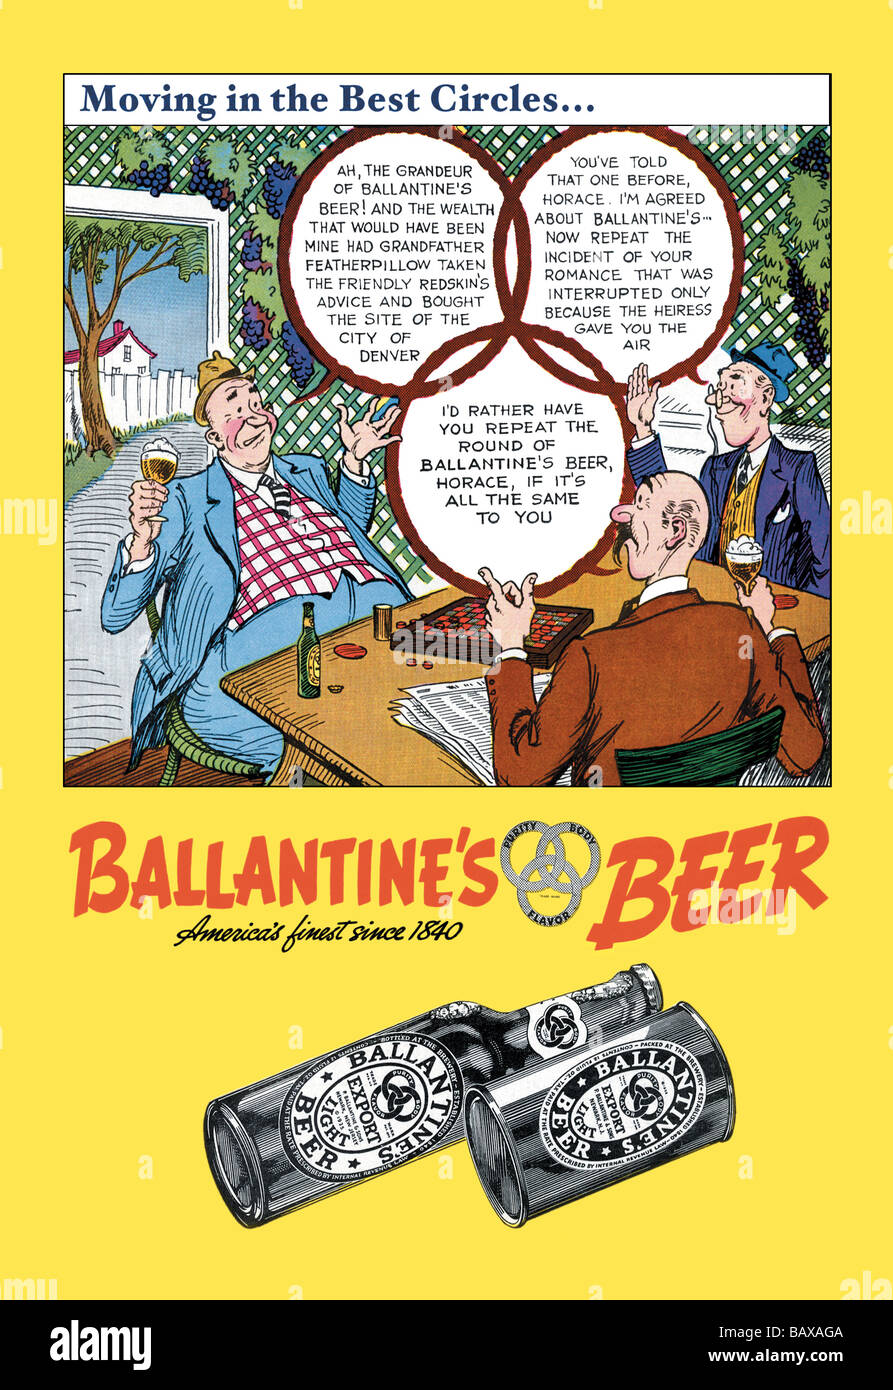 Ballantine's Beer - Moving in the Best Circles Stock Photo